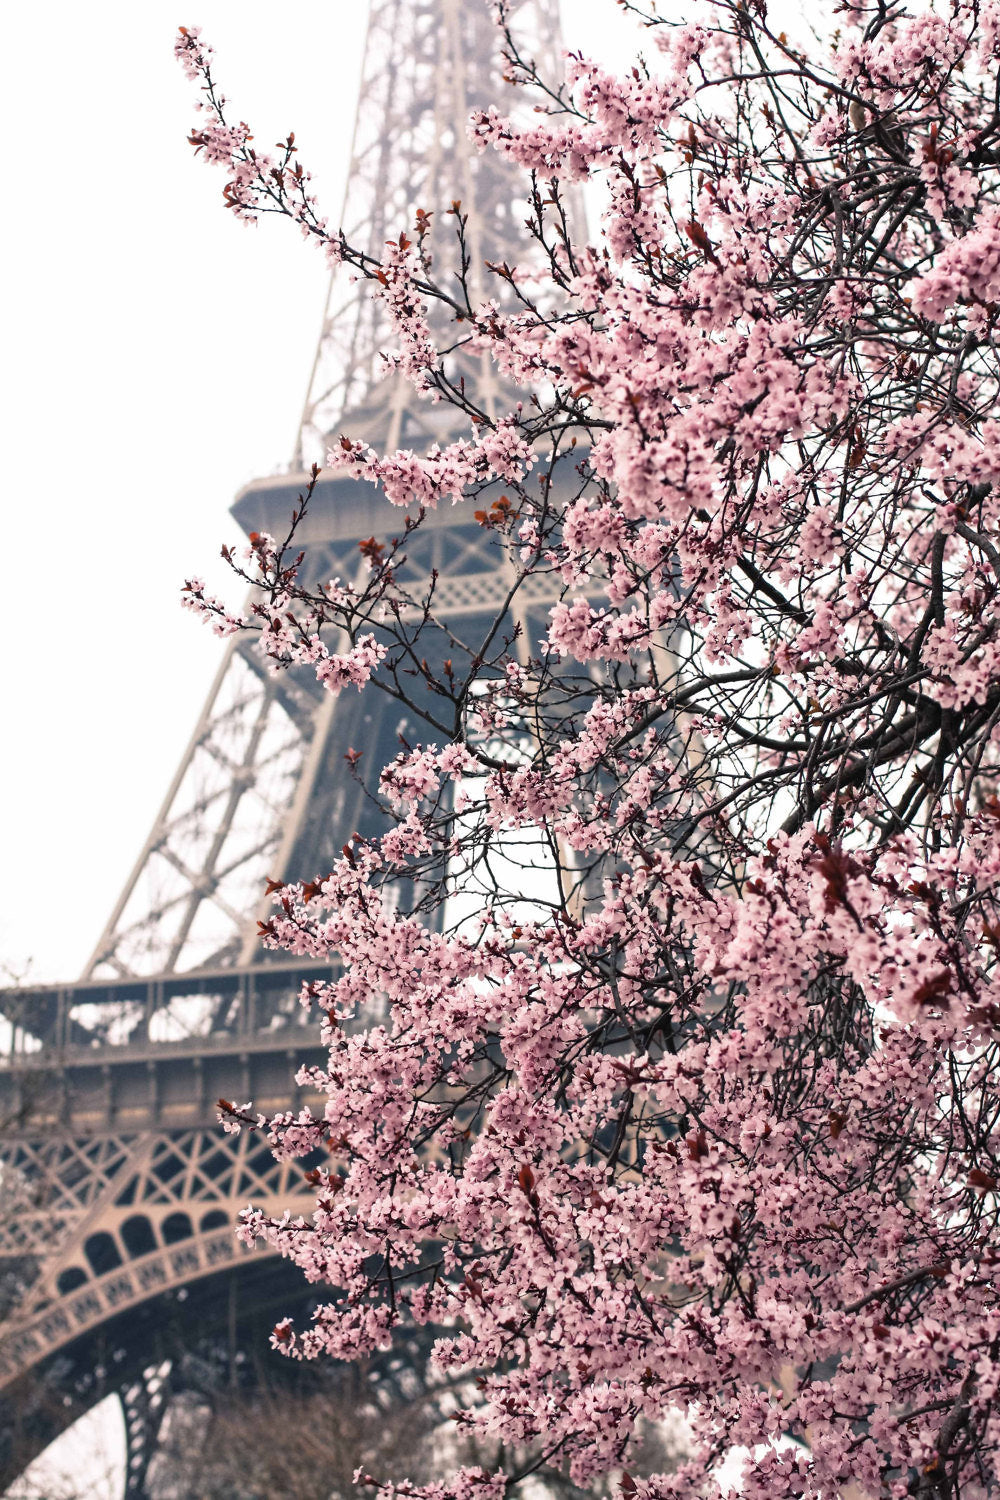 What It's Like to Go to the Top of the Eiffel Tower - Into the Bloom